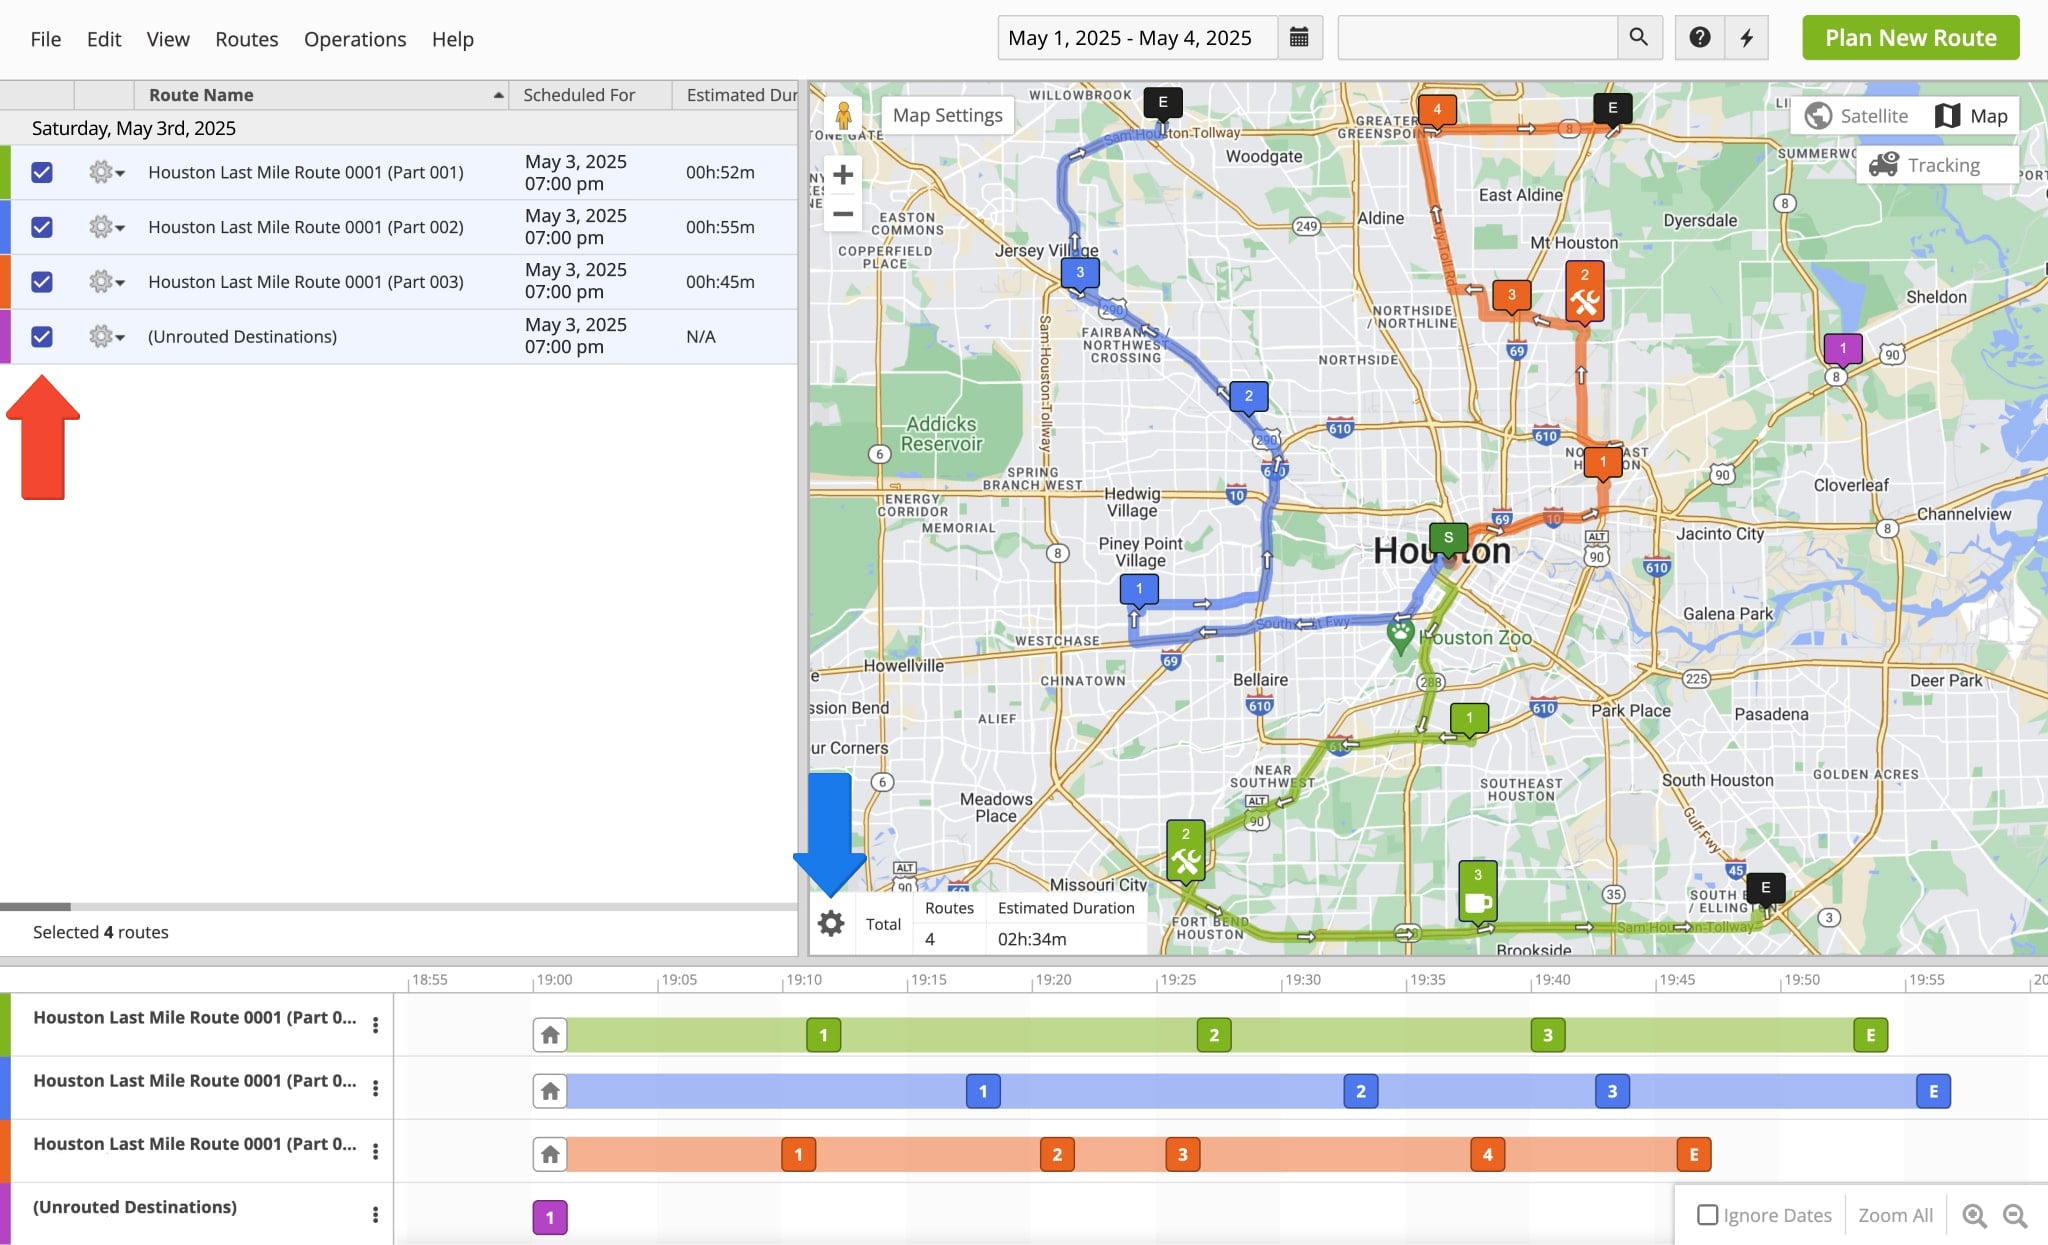 When you plan multiple routes with the Max Duration Business Rule, they are automatically opened in the Routes Map.